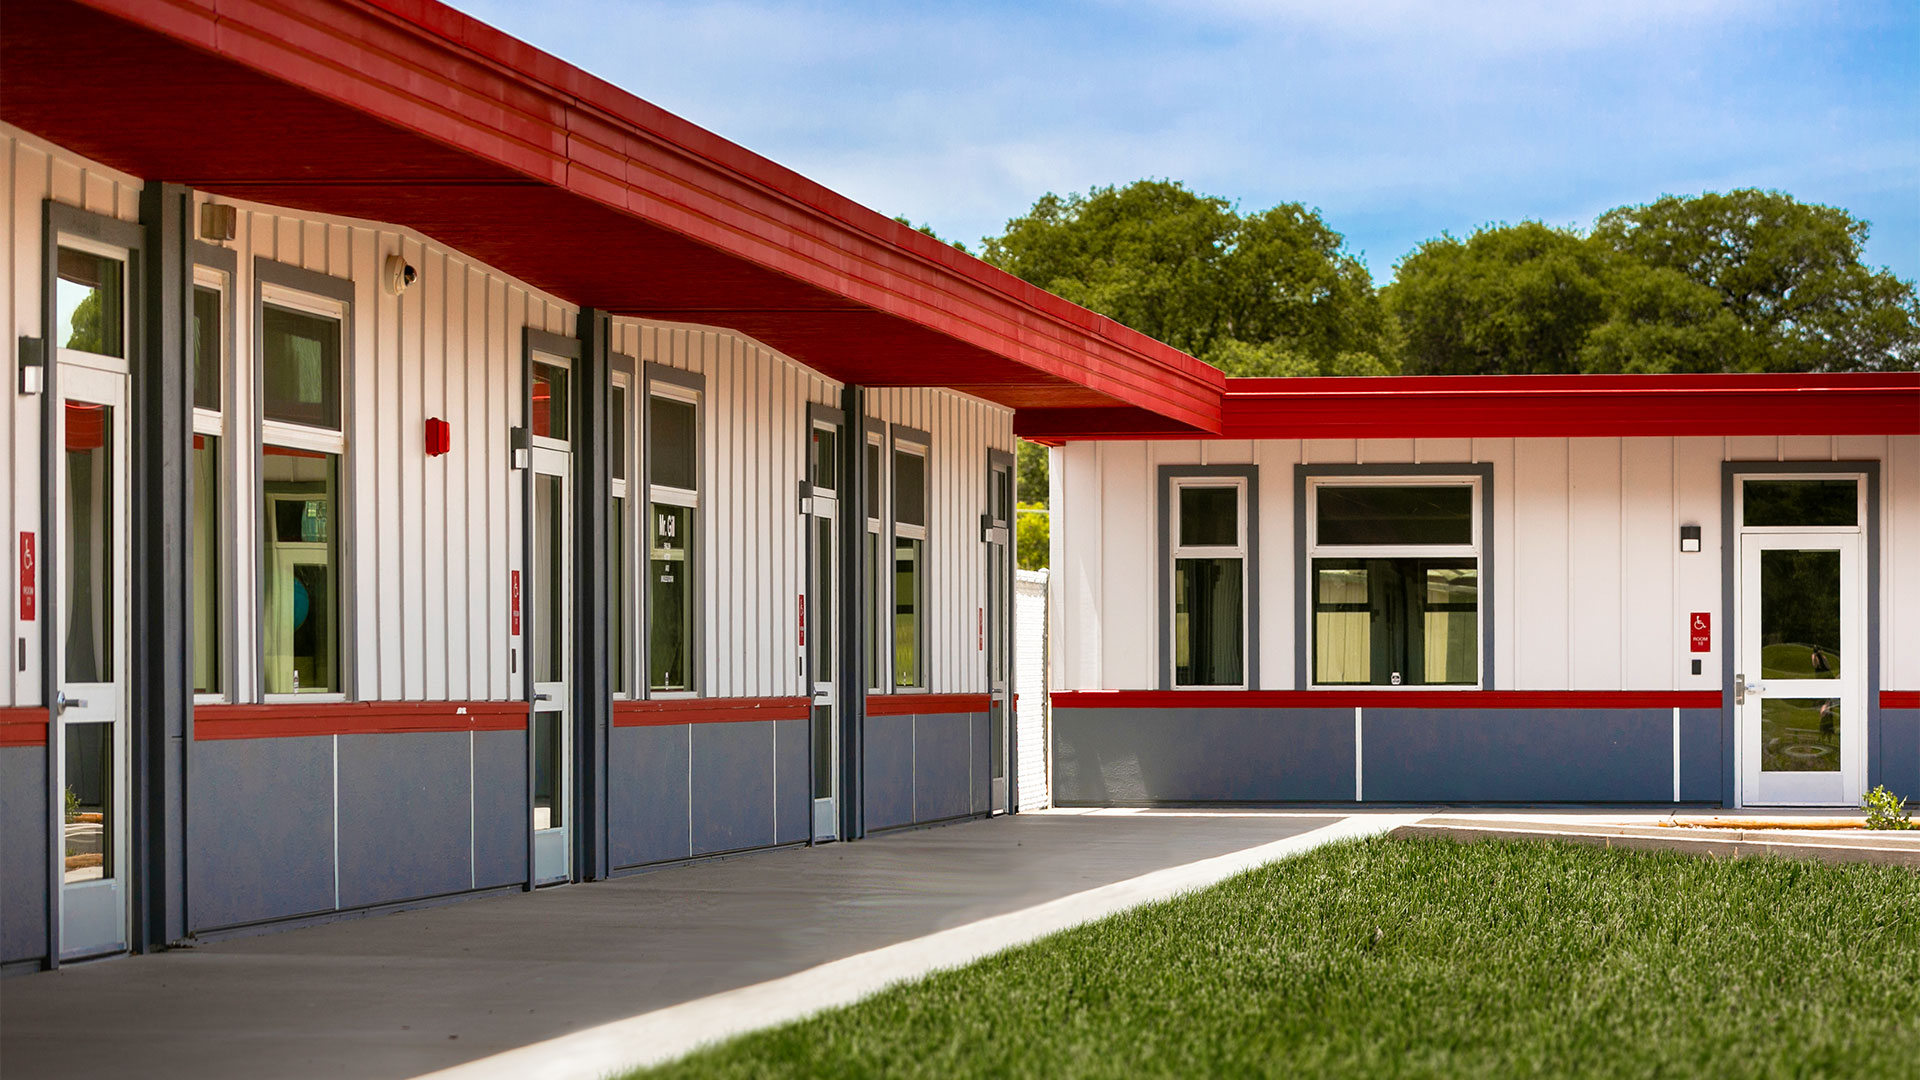 Portable classroom wing with white panel walls and gray wainscot, with concrete walkway and grass.